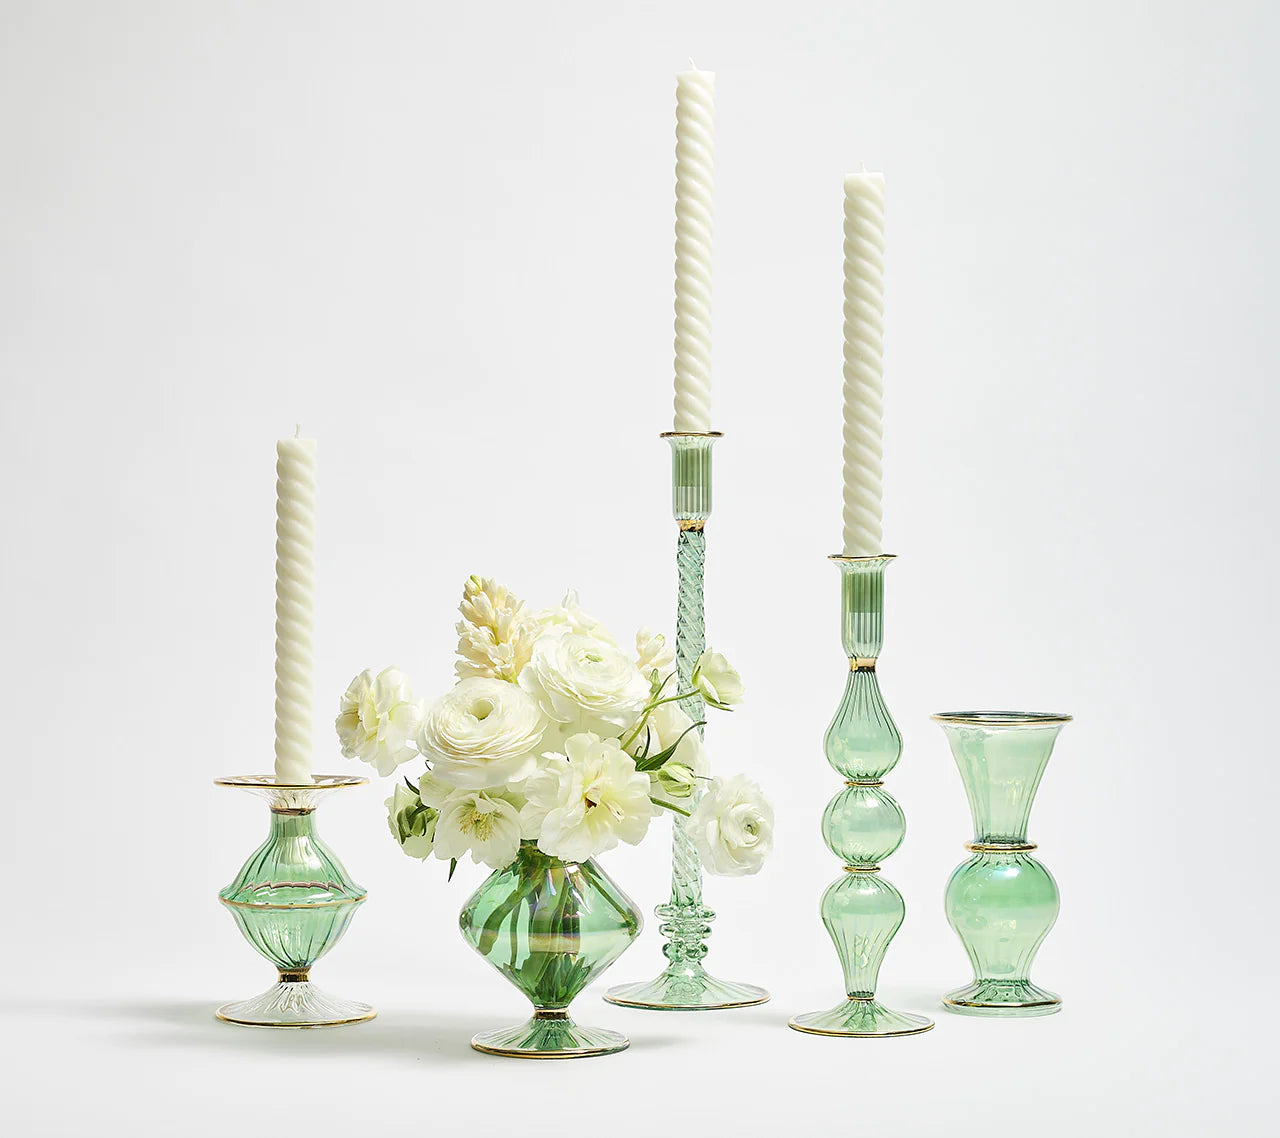 Ripple Candle Holder in Green